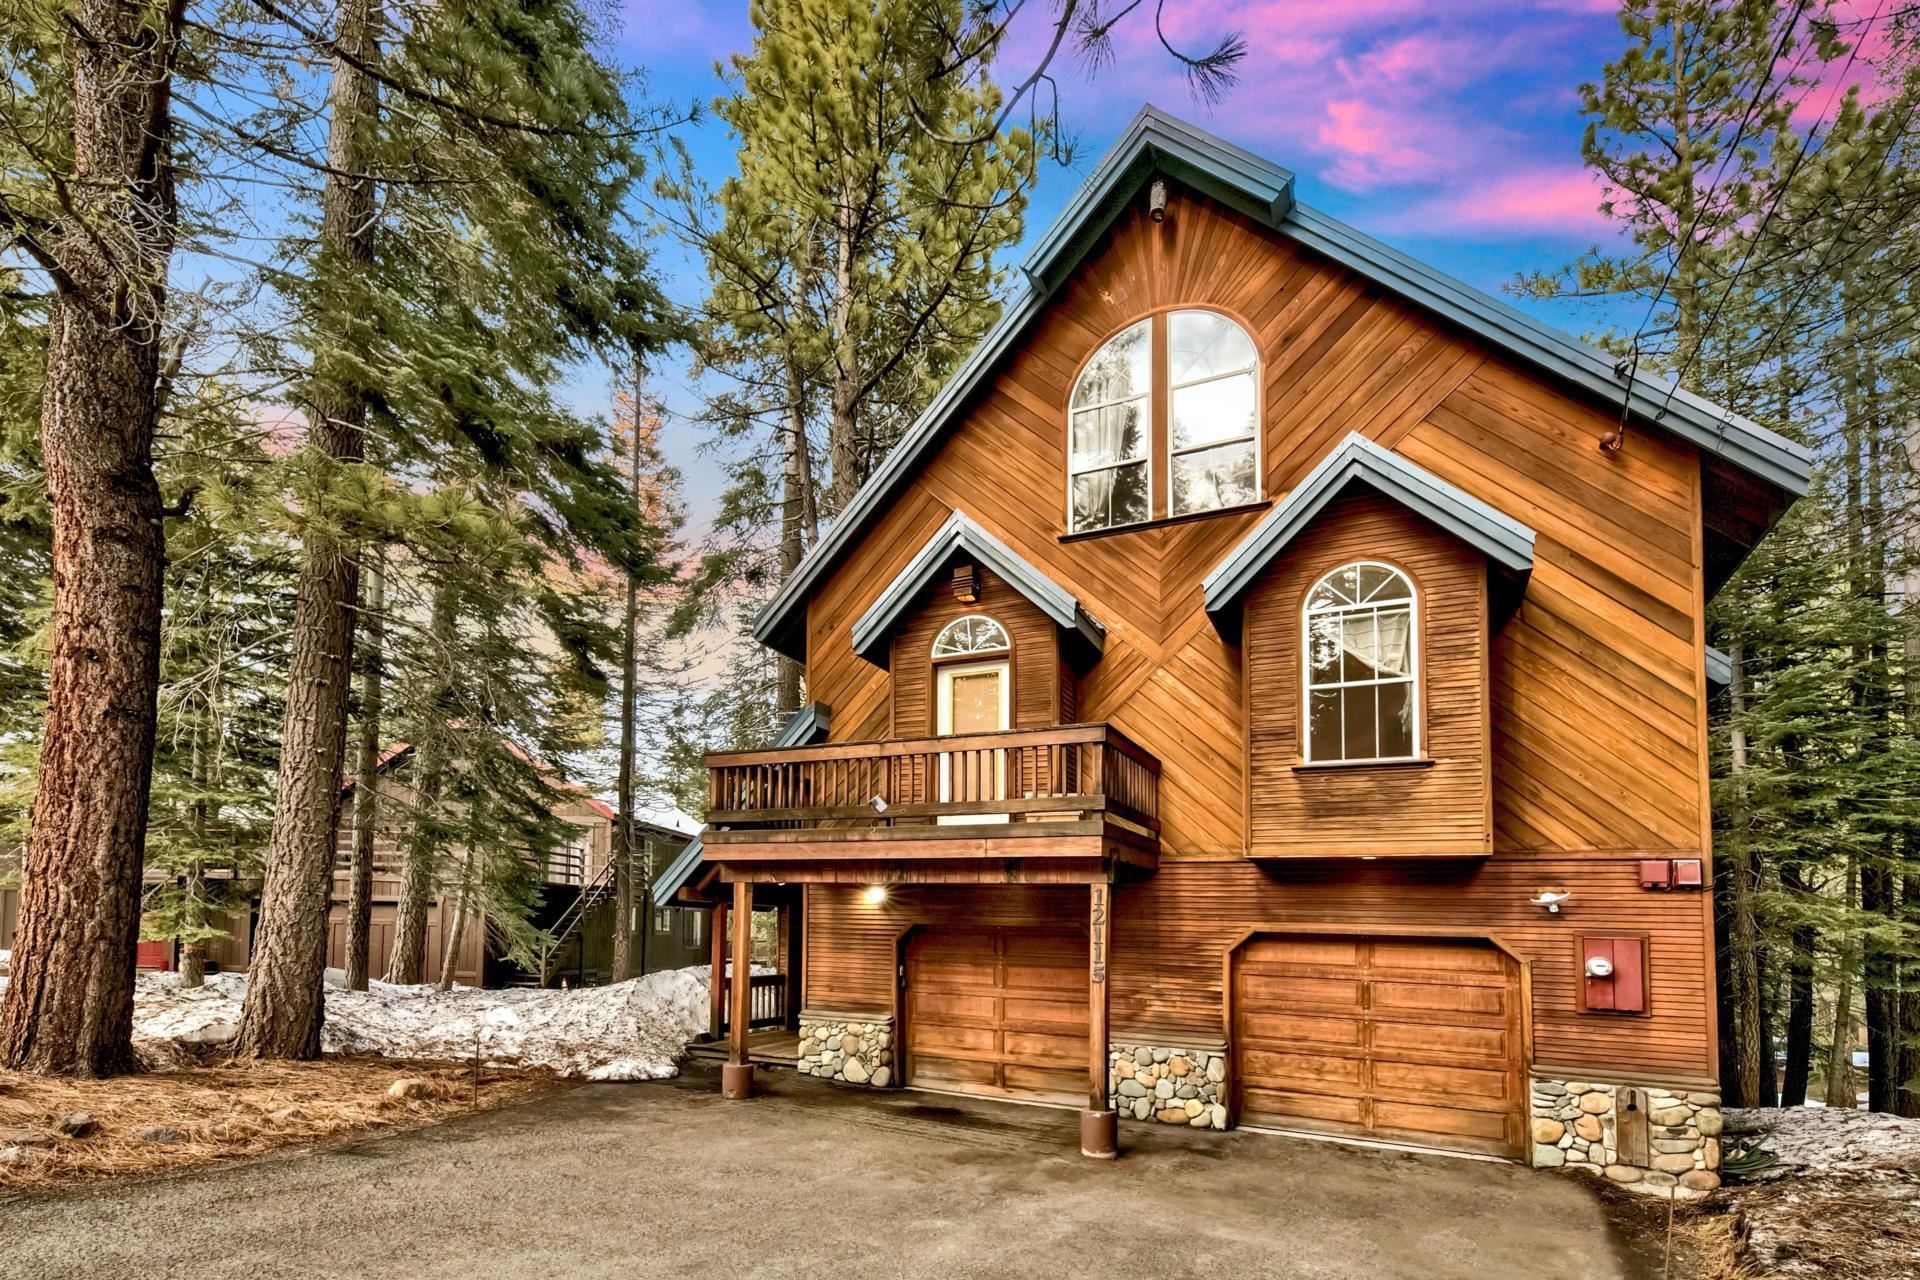 Image for 12115 Schussing Way, Truckee, CA 96161-6210